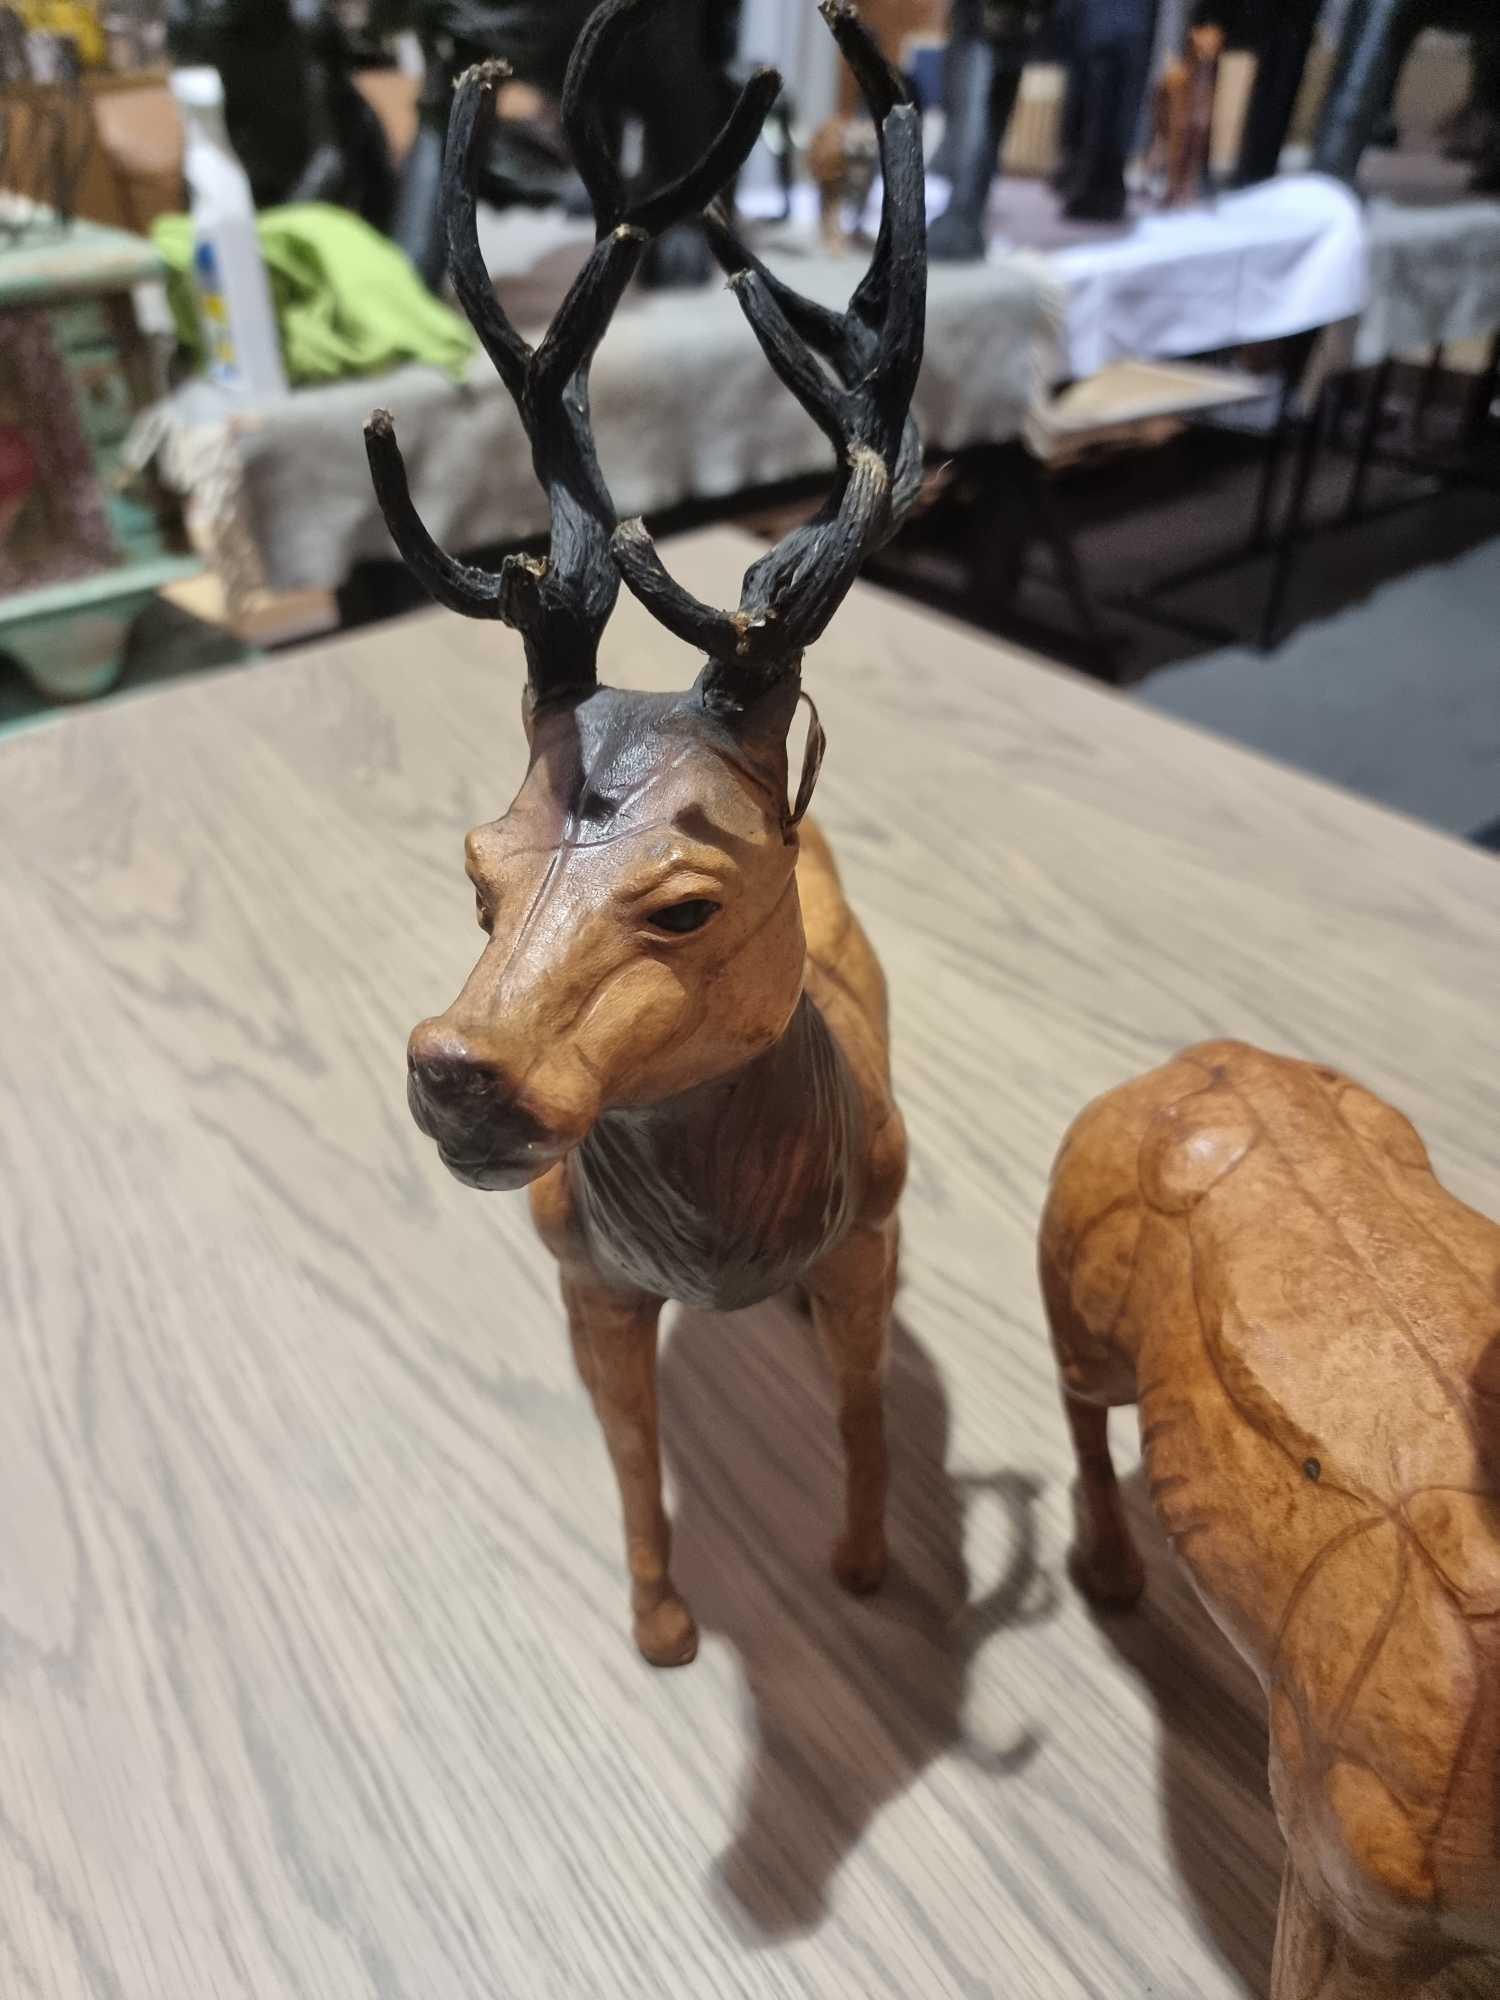 A Set of 2 x Leather Wrapped Deer with Antlers With Glass Eyes The Deer Have Glass Eyes And Is - Image 3 of 9